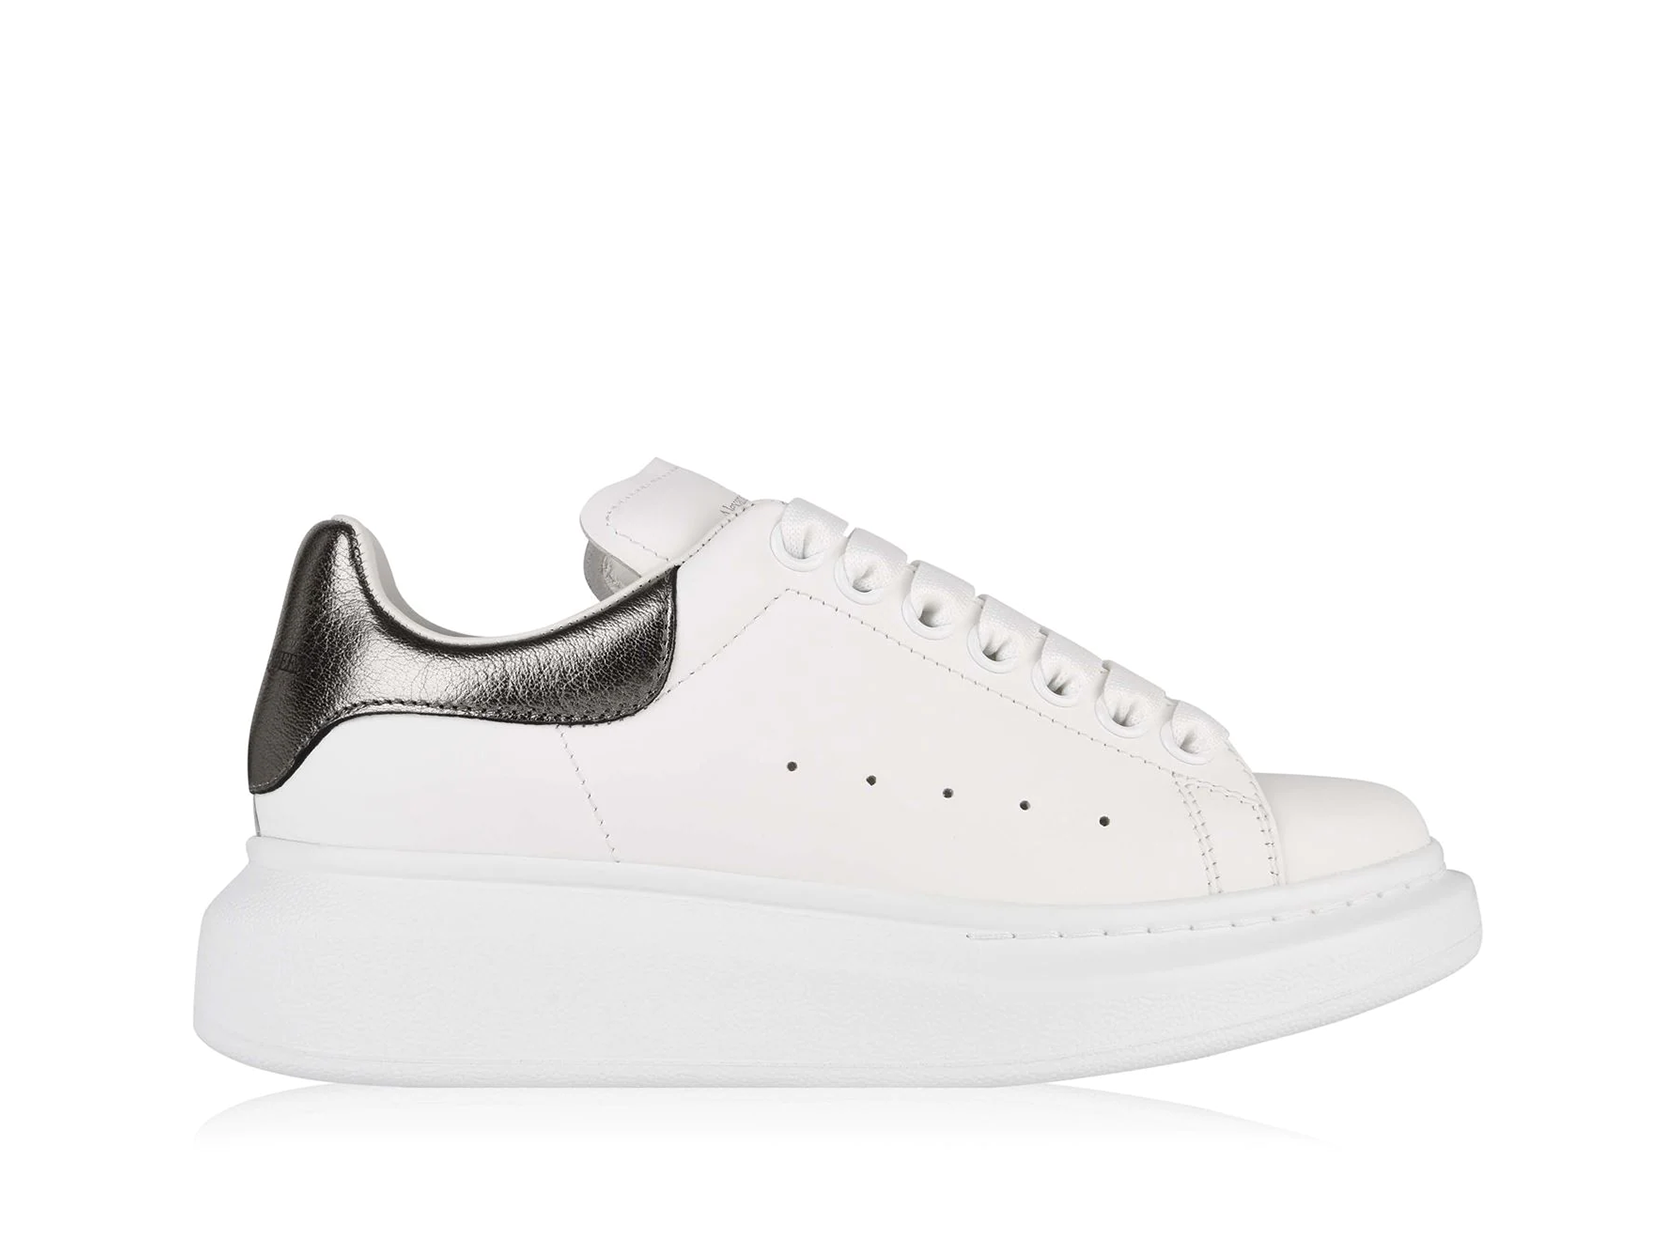 Double Boxed  419.99 Alexander McQueen Oversized White Pearl Women's Double Boxed